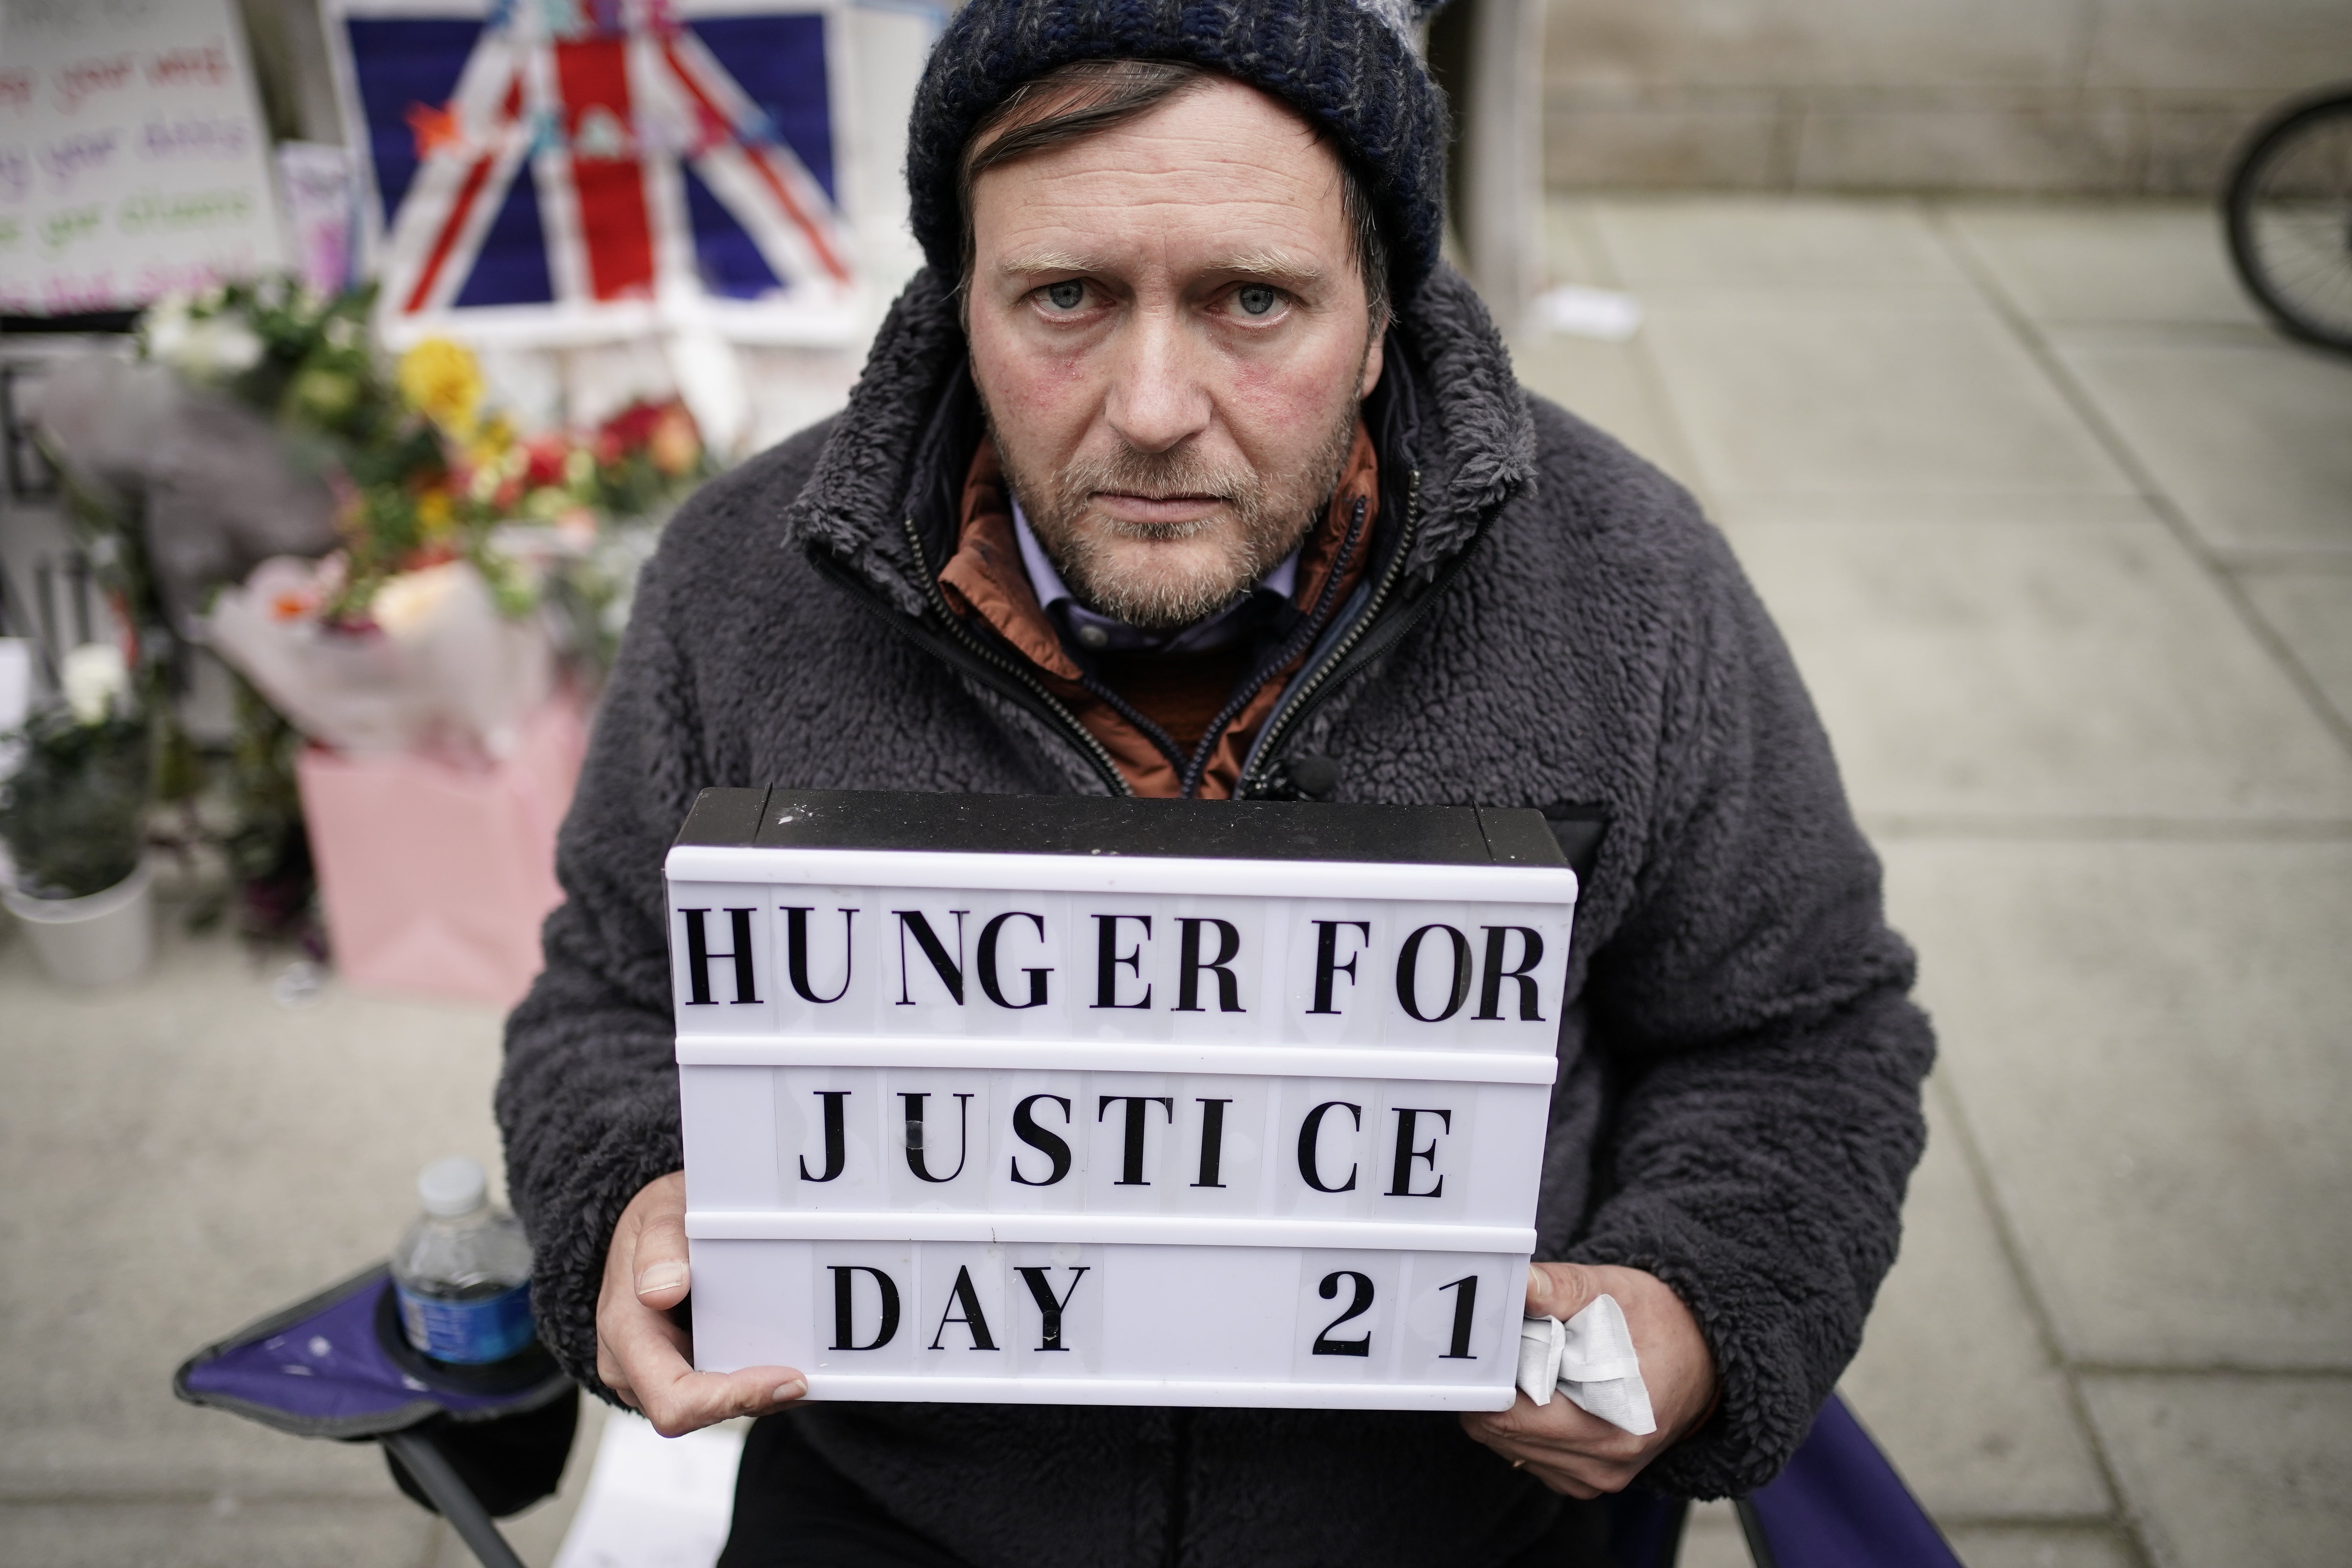 Richard Ratcliffe, the husband of Iranian detainee Nazanin Zaghari-Ratcliffe, during his hunger strike in central London last year